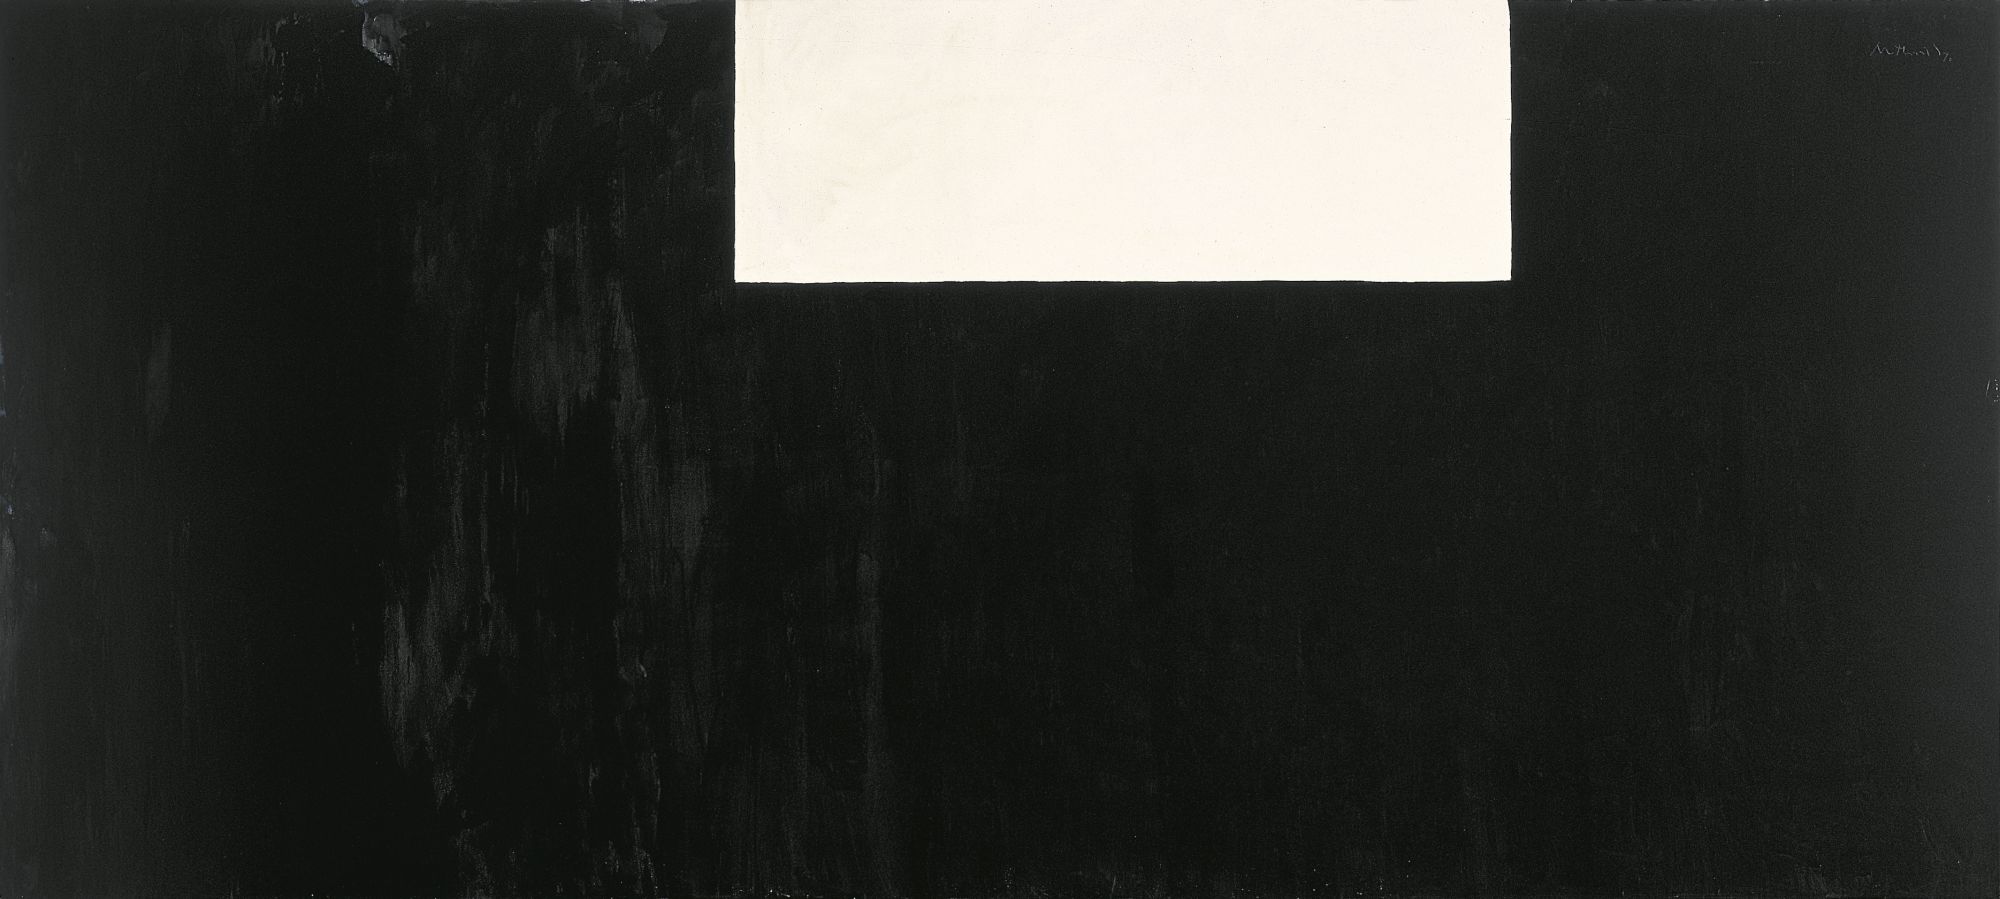 Open No. 150: In Black and Cream (Rothko Elegy), 1970. Acrylic on canvas, 69 x 204 ¼ inches (175.3 x 518.8 cm)